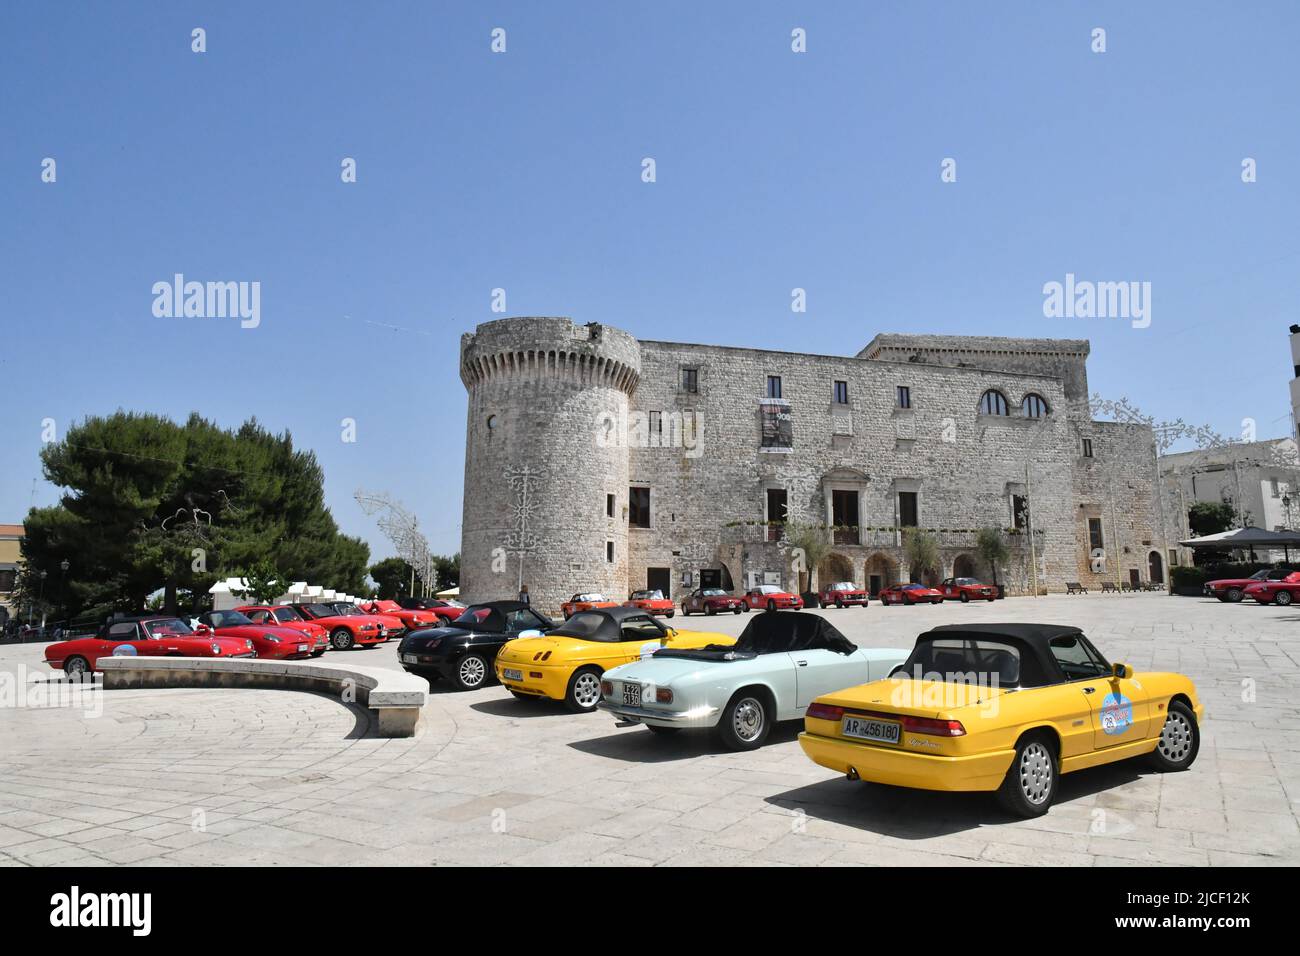 Gathering of sports cars in front of the castle of Conversano, an old town in southern Italy. Stock Photo